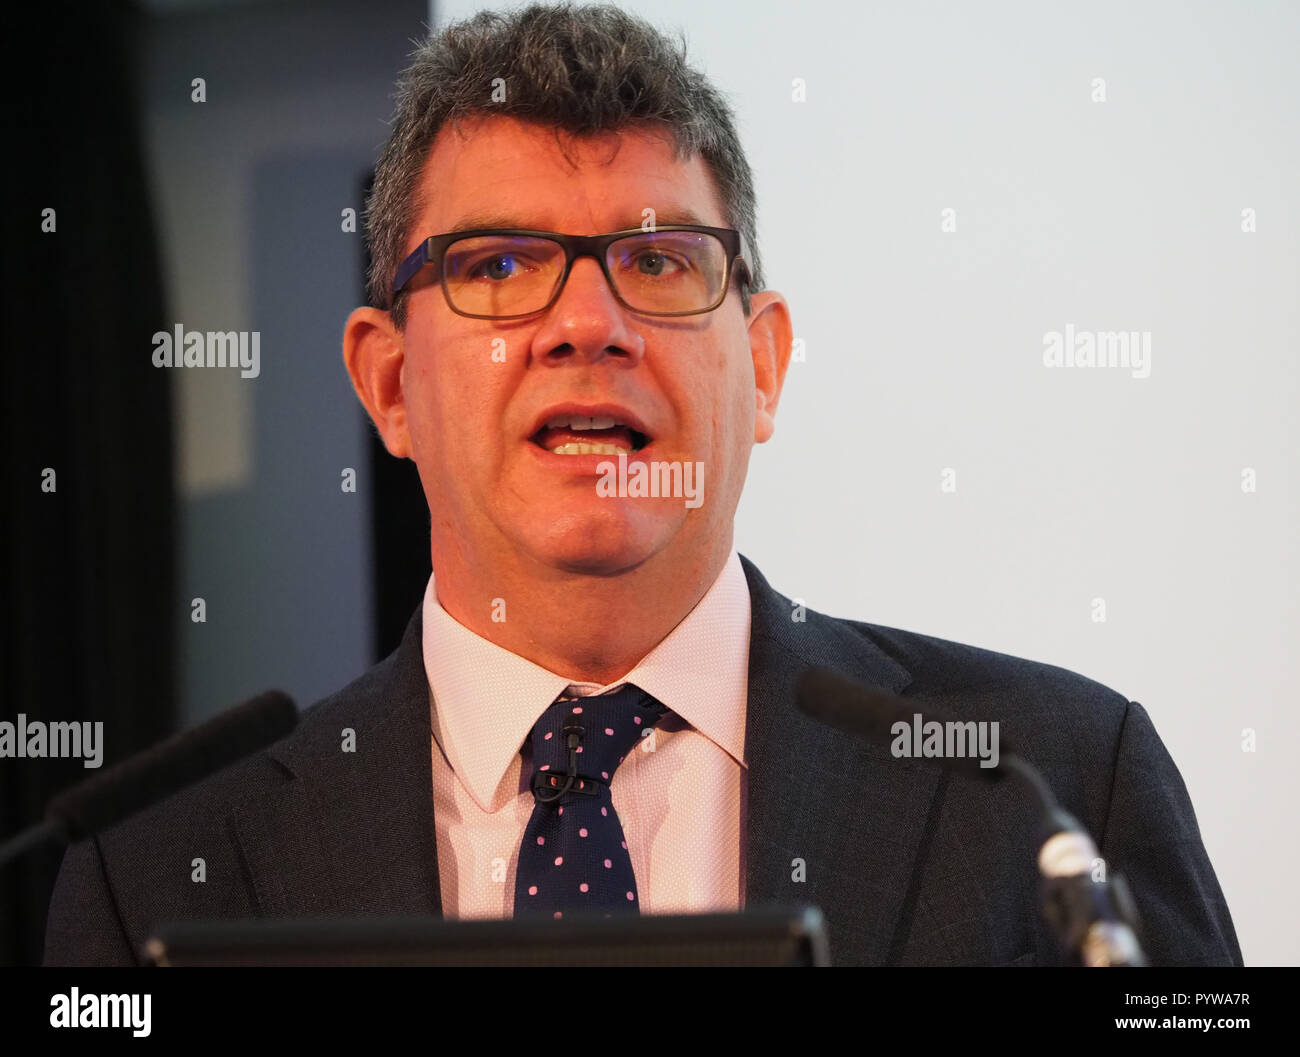 London, UK. 30th Oct, 2018. Martin Rolfe, CEO of NATS speaking at the Airport Operators Conference being held at County Hall, London today (Tues) Credit: Finnbarr Webster/Alamy Live News Stock Photo